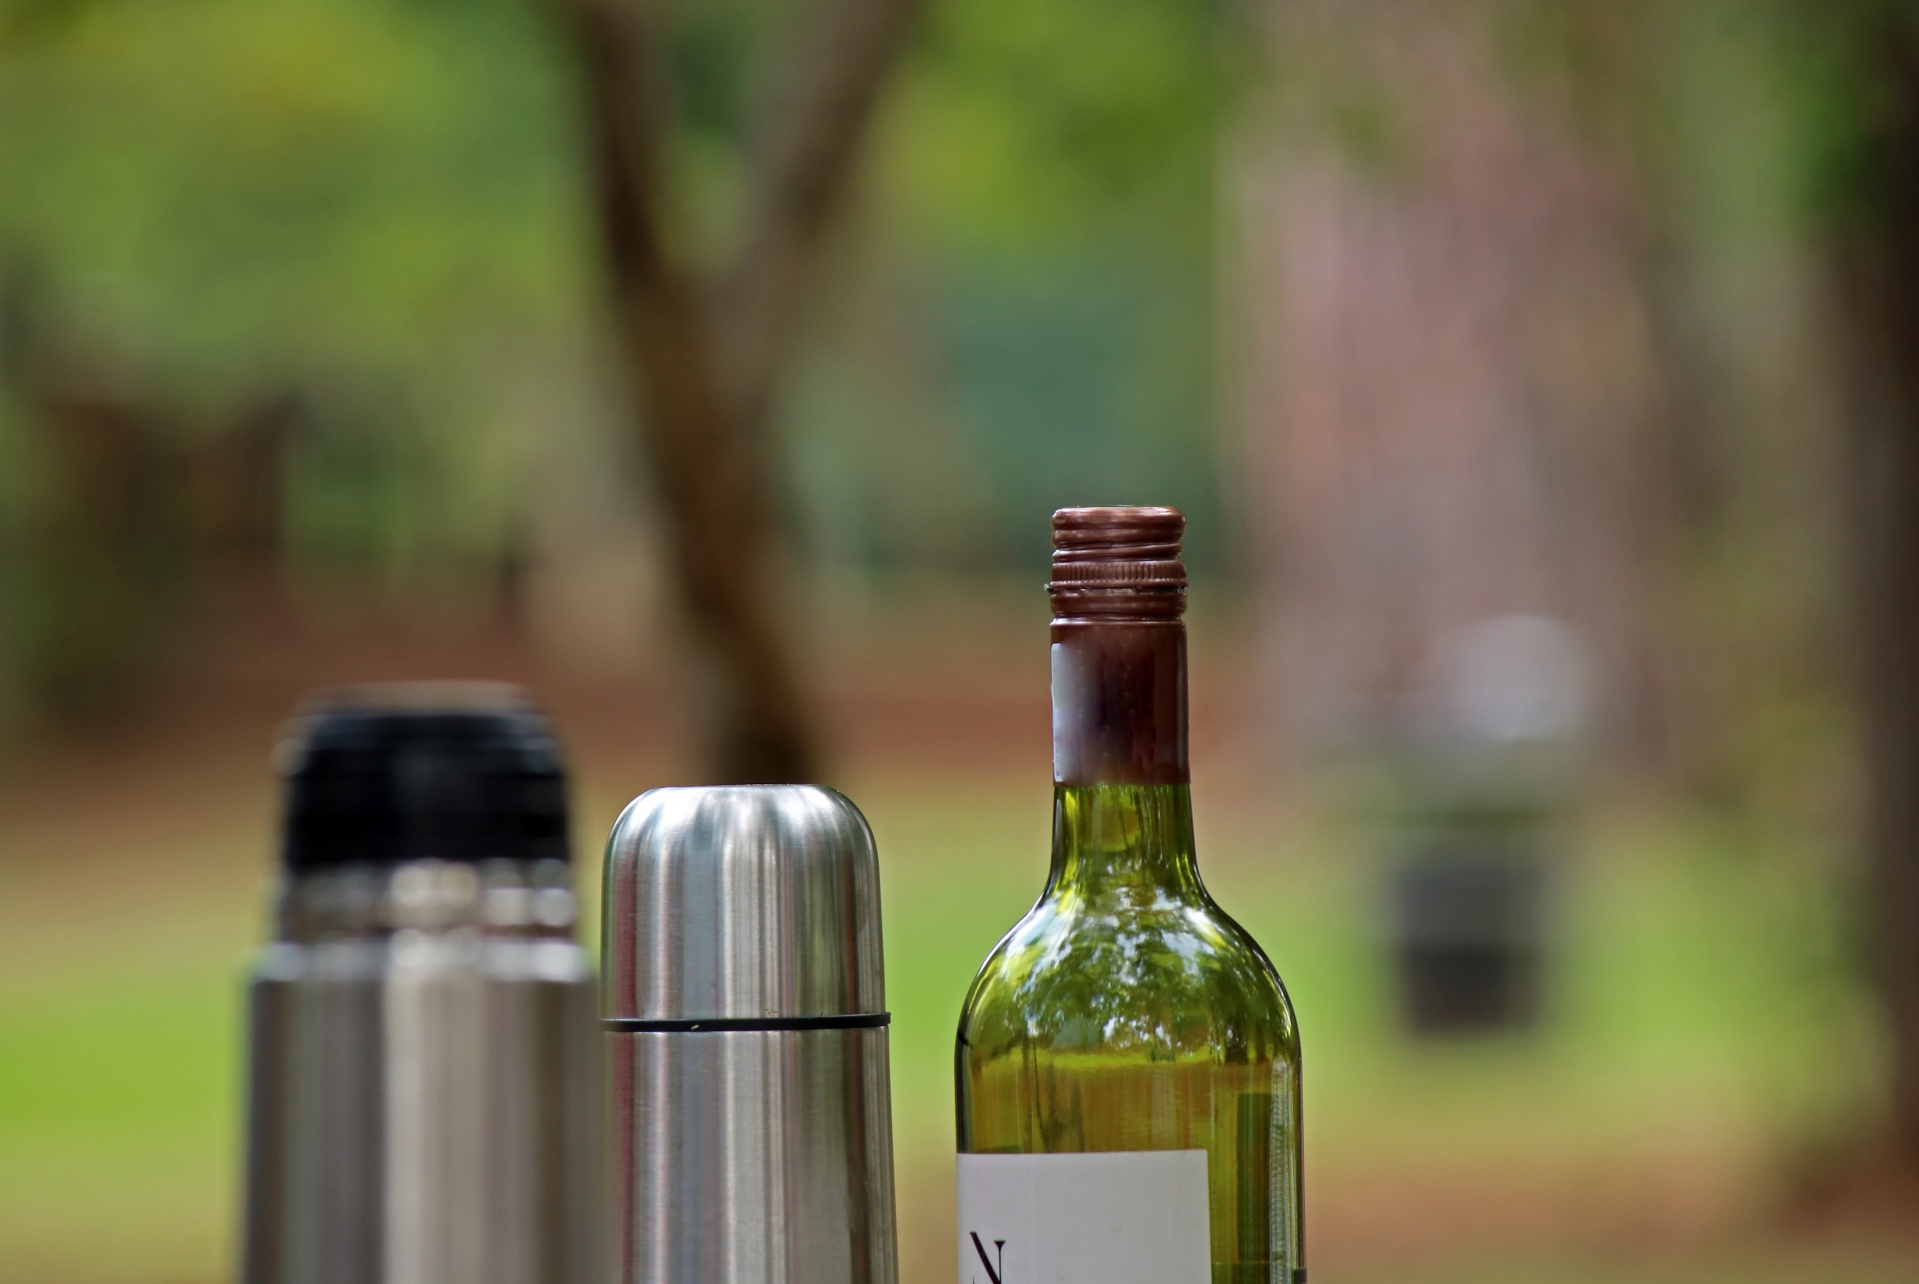 Wine Bottle And Hot Water Flask